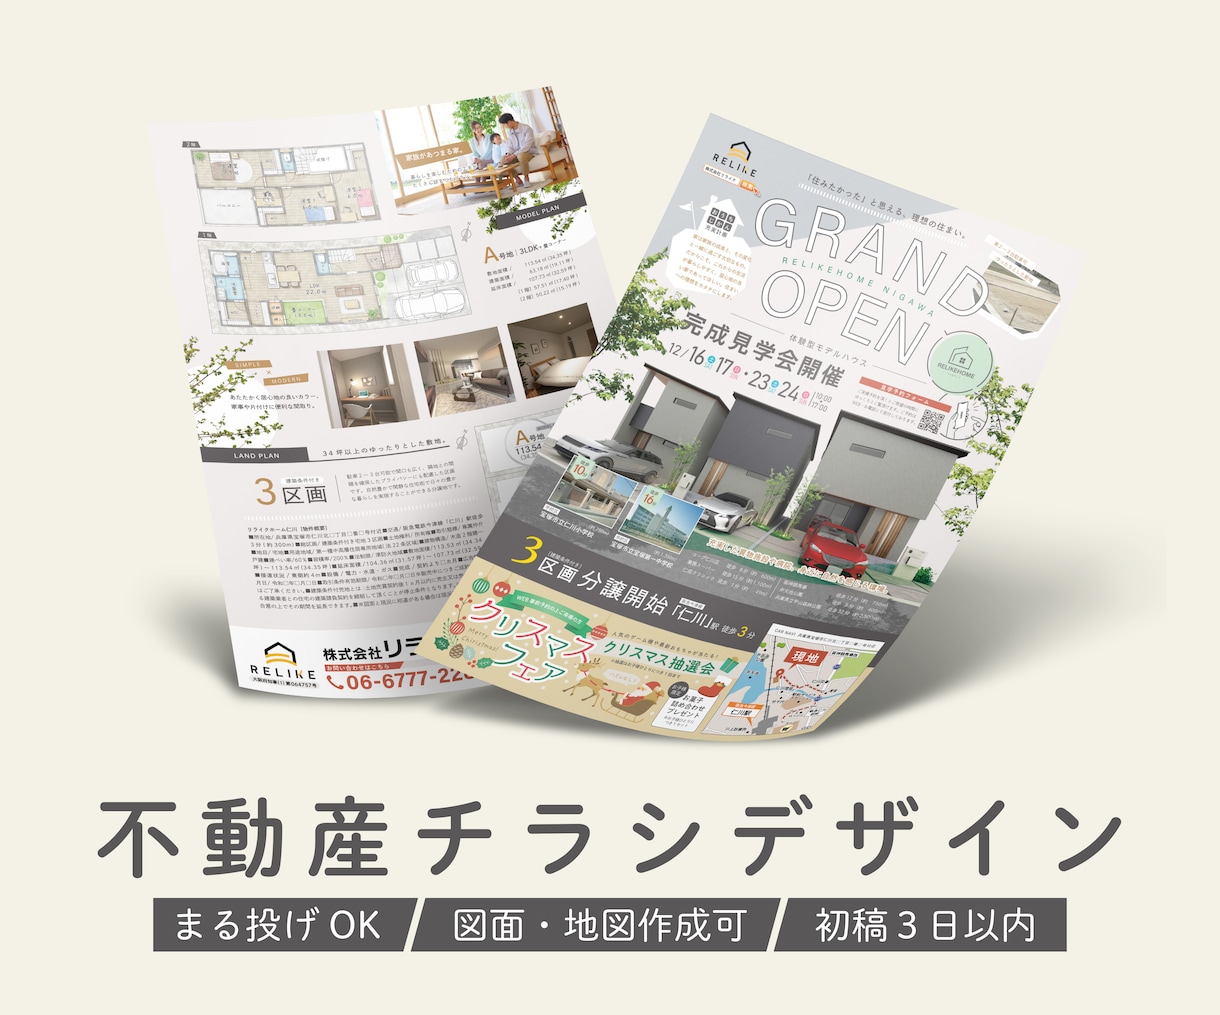 💬Coconara｜Design a flyer to attract real estate customers RELIKE Real estate advertising design 5.0…